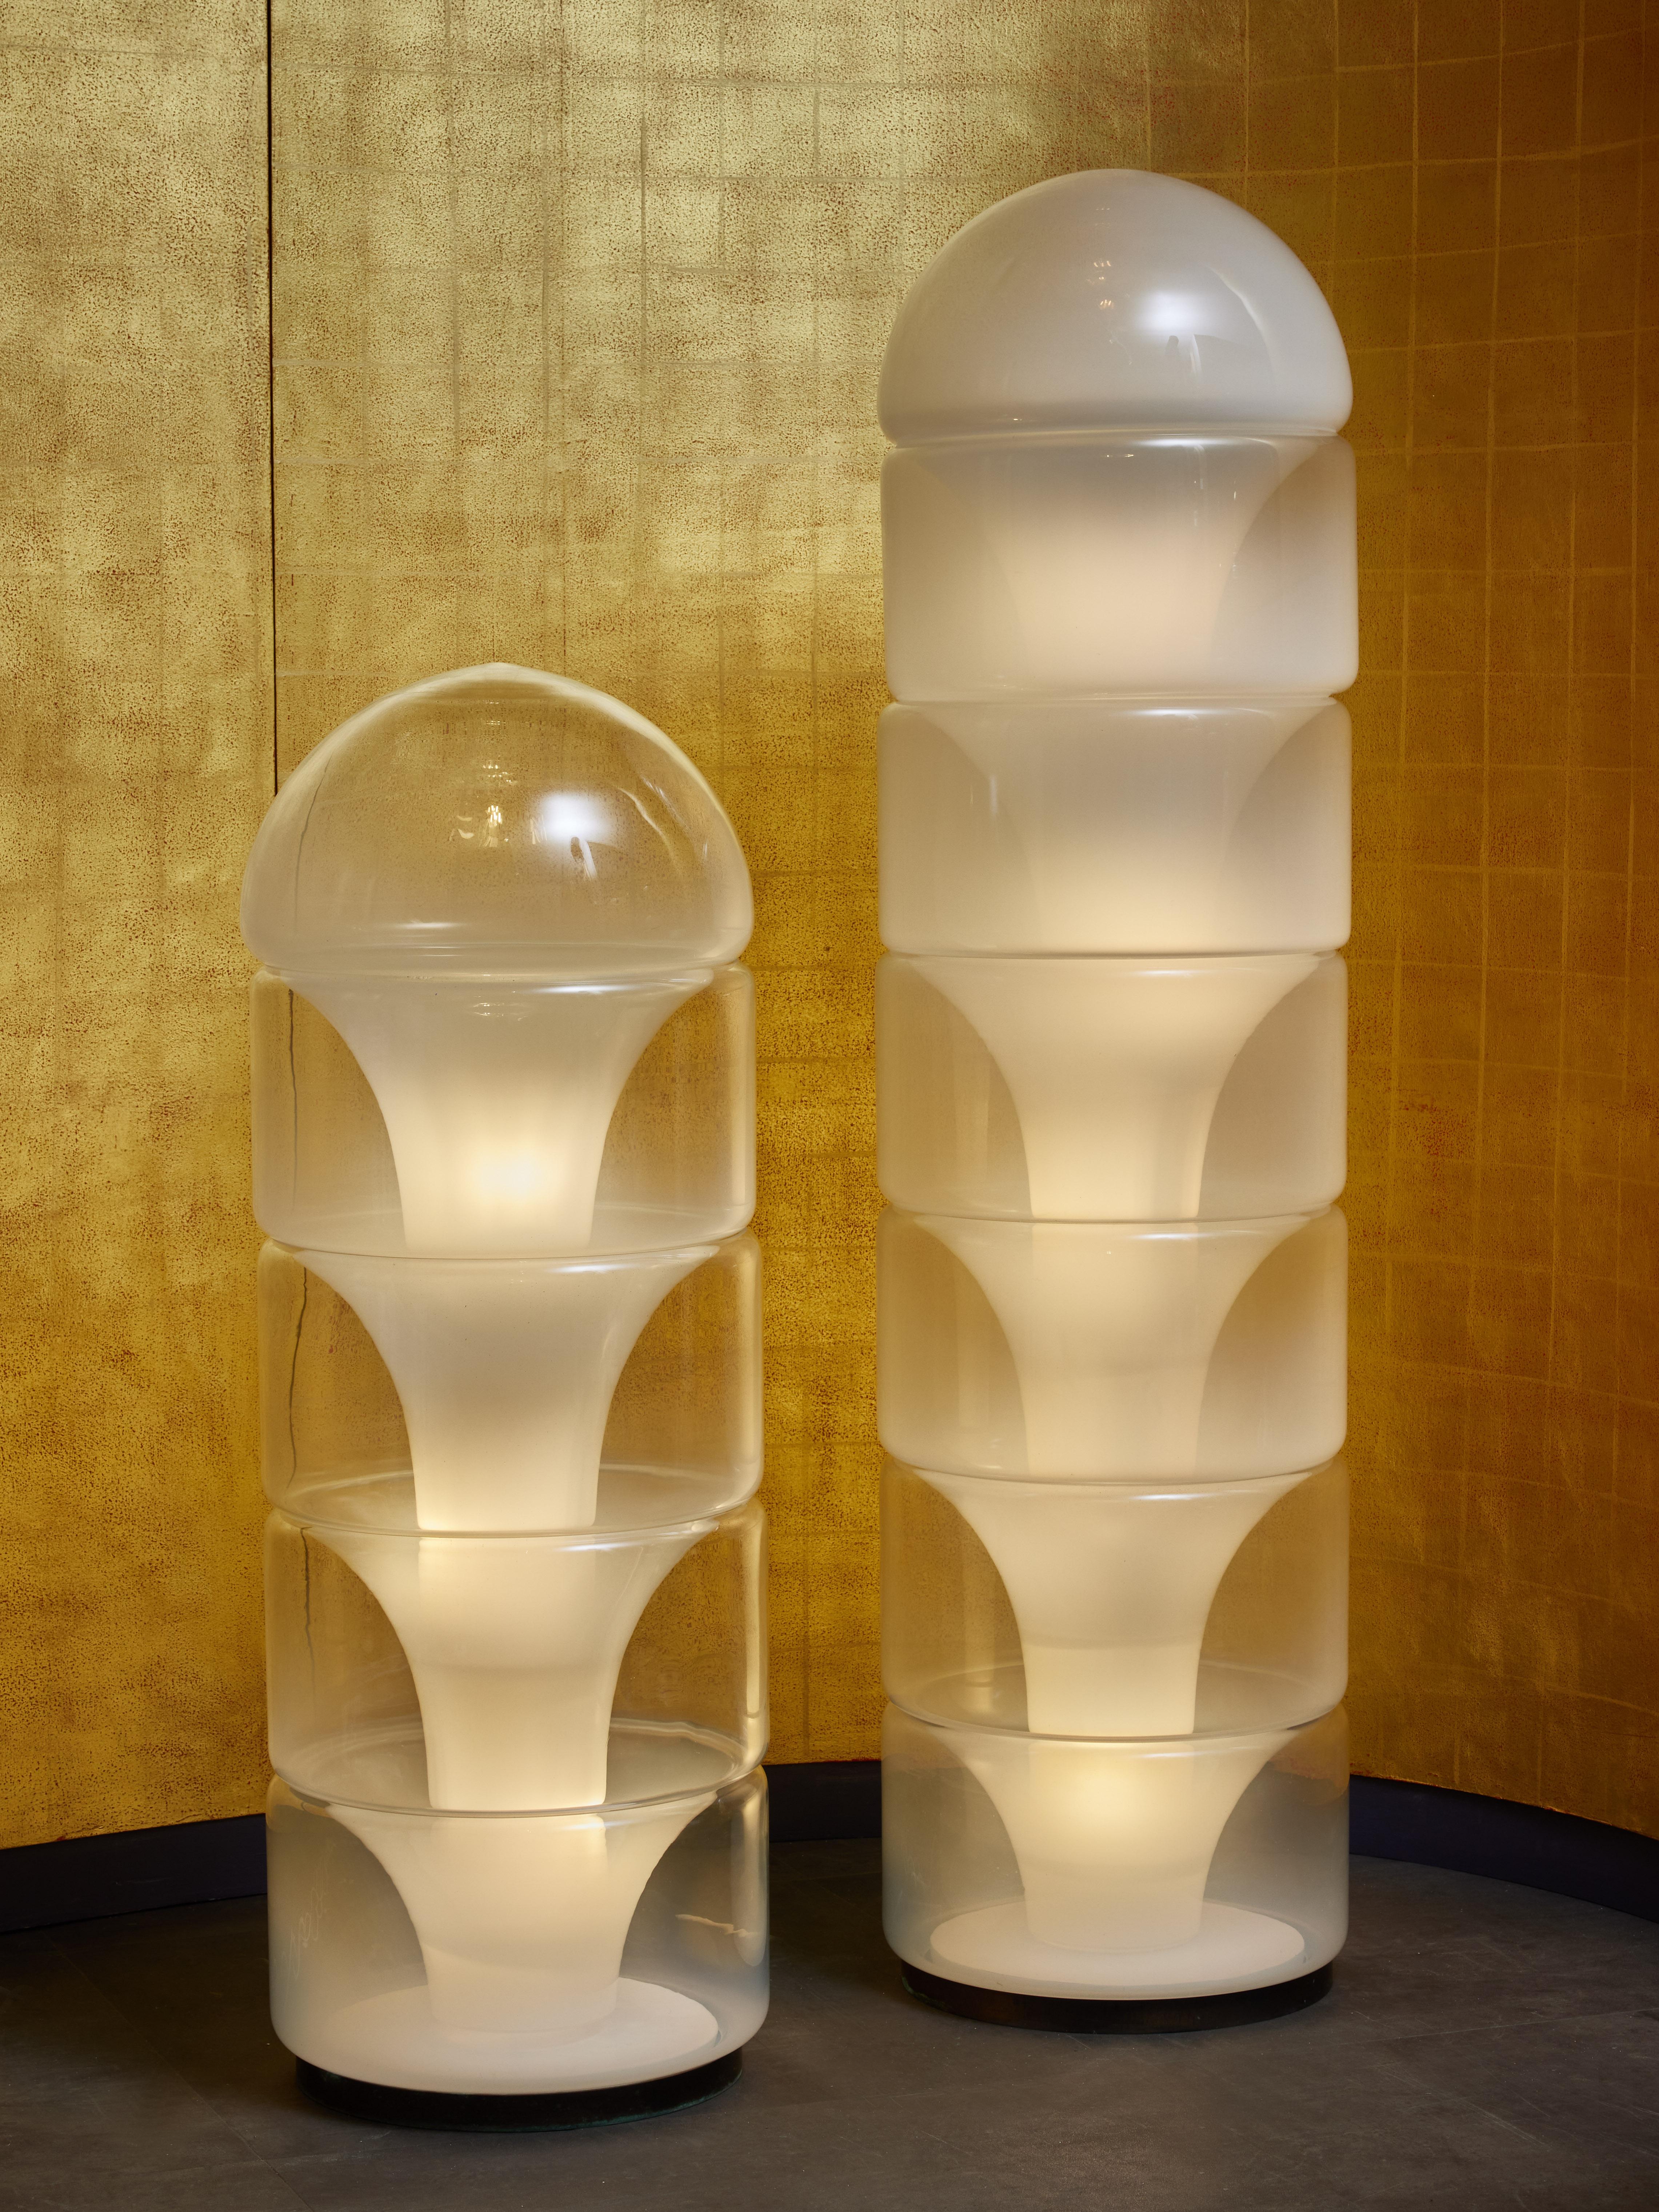 Sfumato glass floor lamp designed by Carlo Nason for Mazzega.

This piece (pictured on the left) is made of a metal inner structure on which is stacked five Murano glass elements spreading the light.